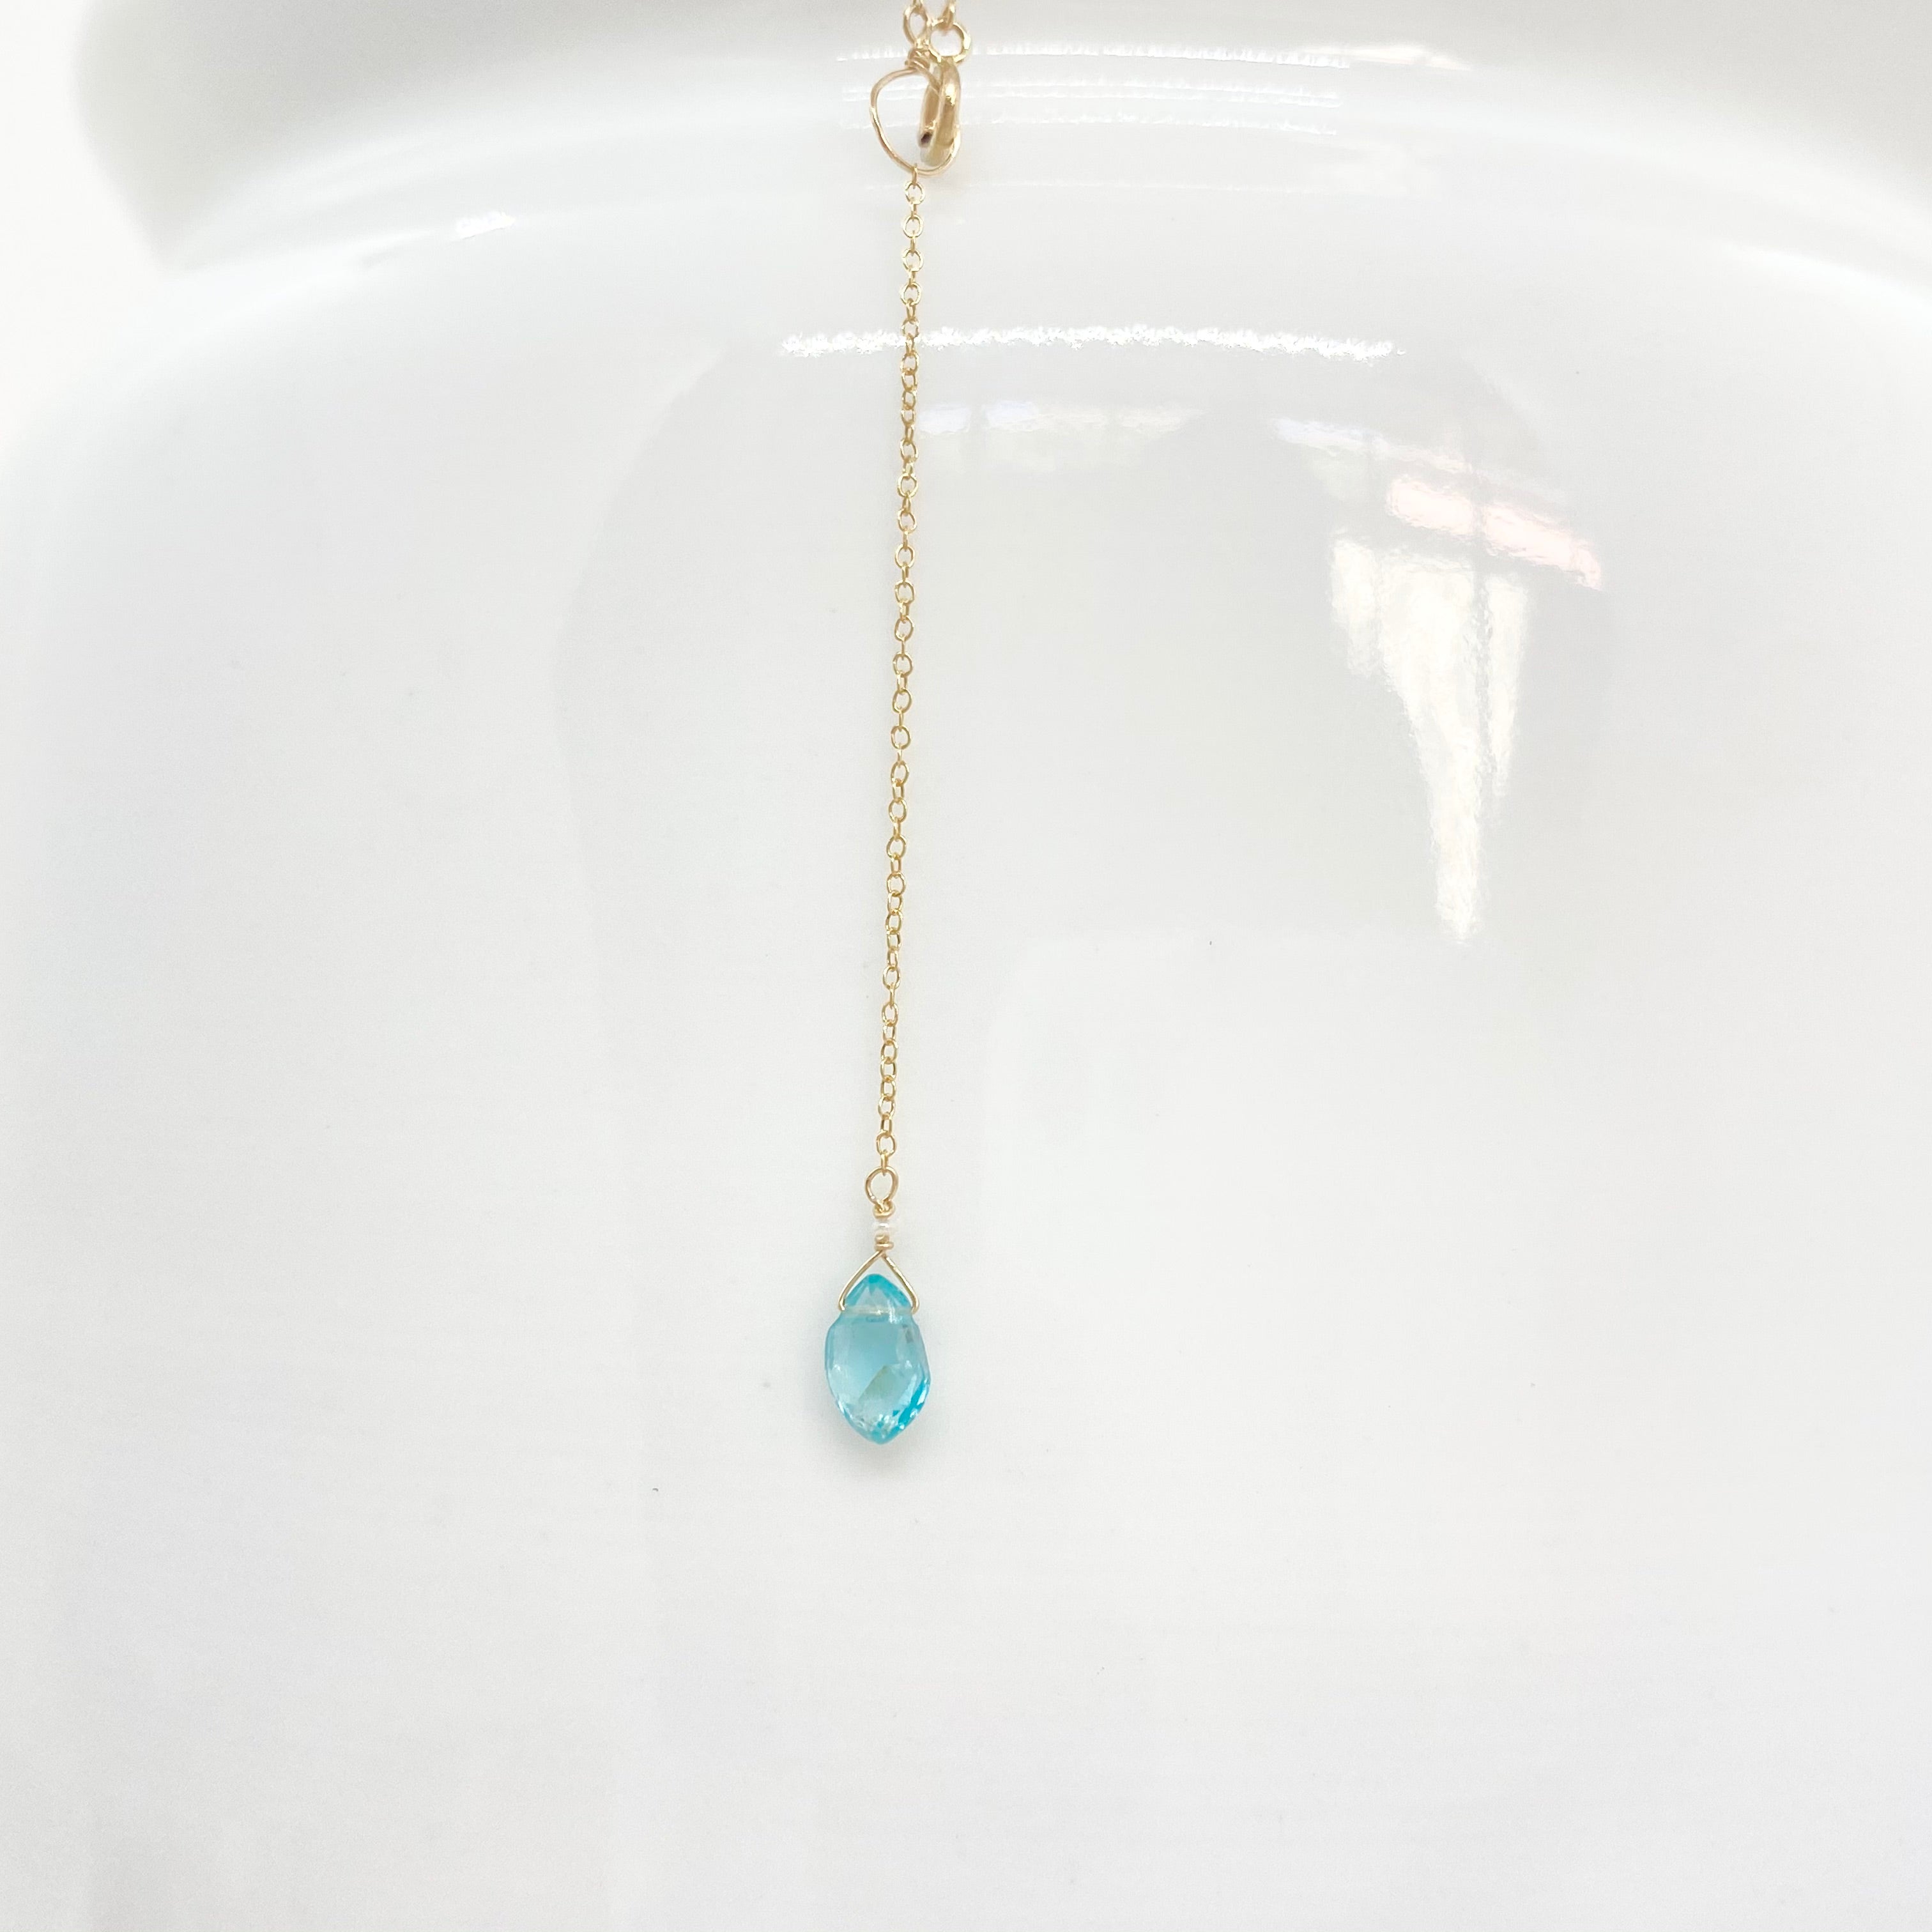 14k Gold Chain Necklace w/ Afghan Turquoise